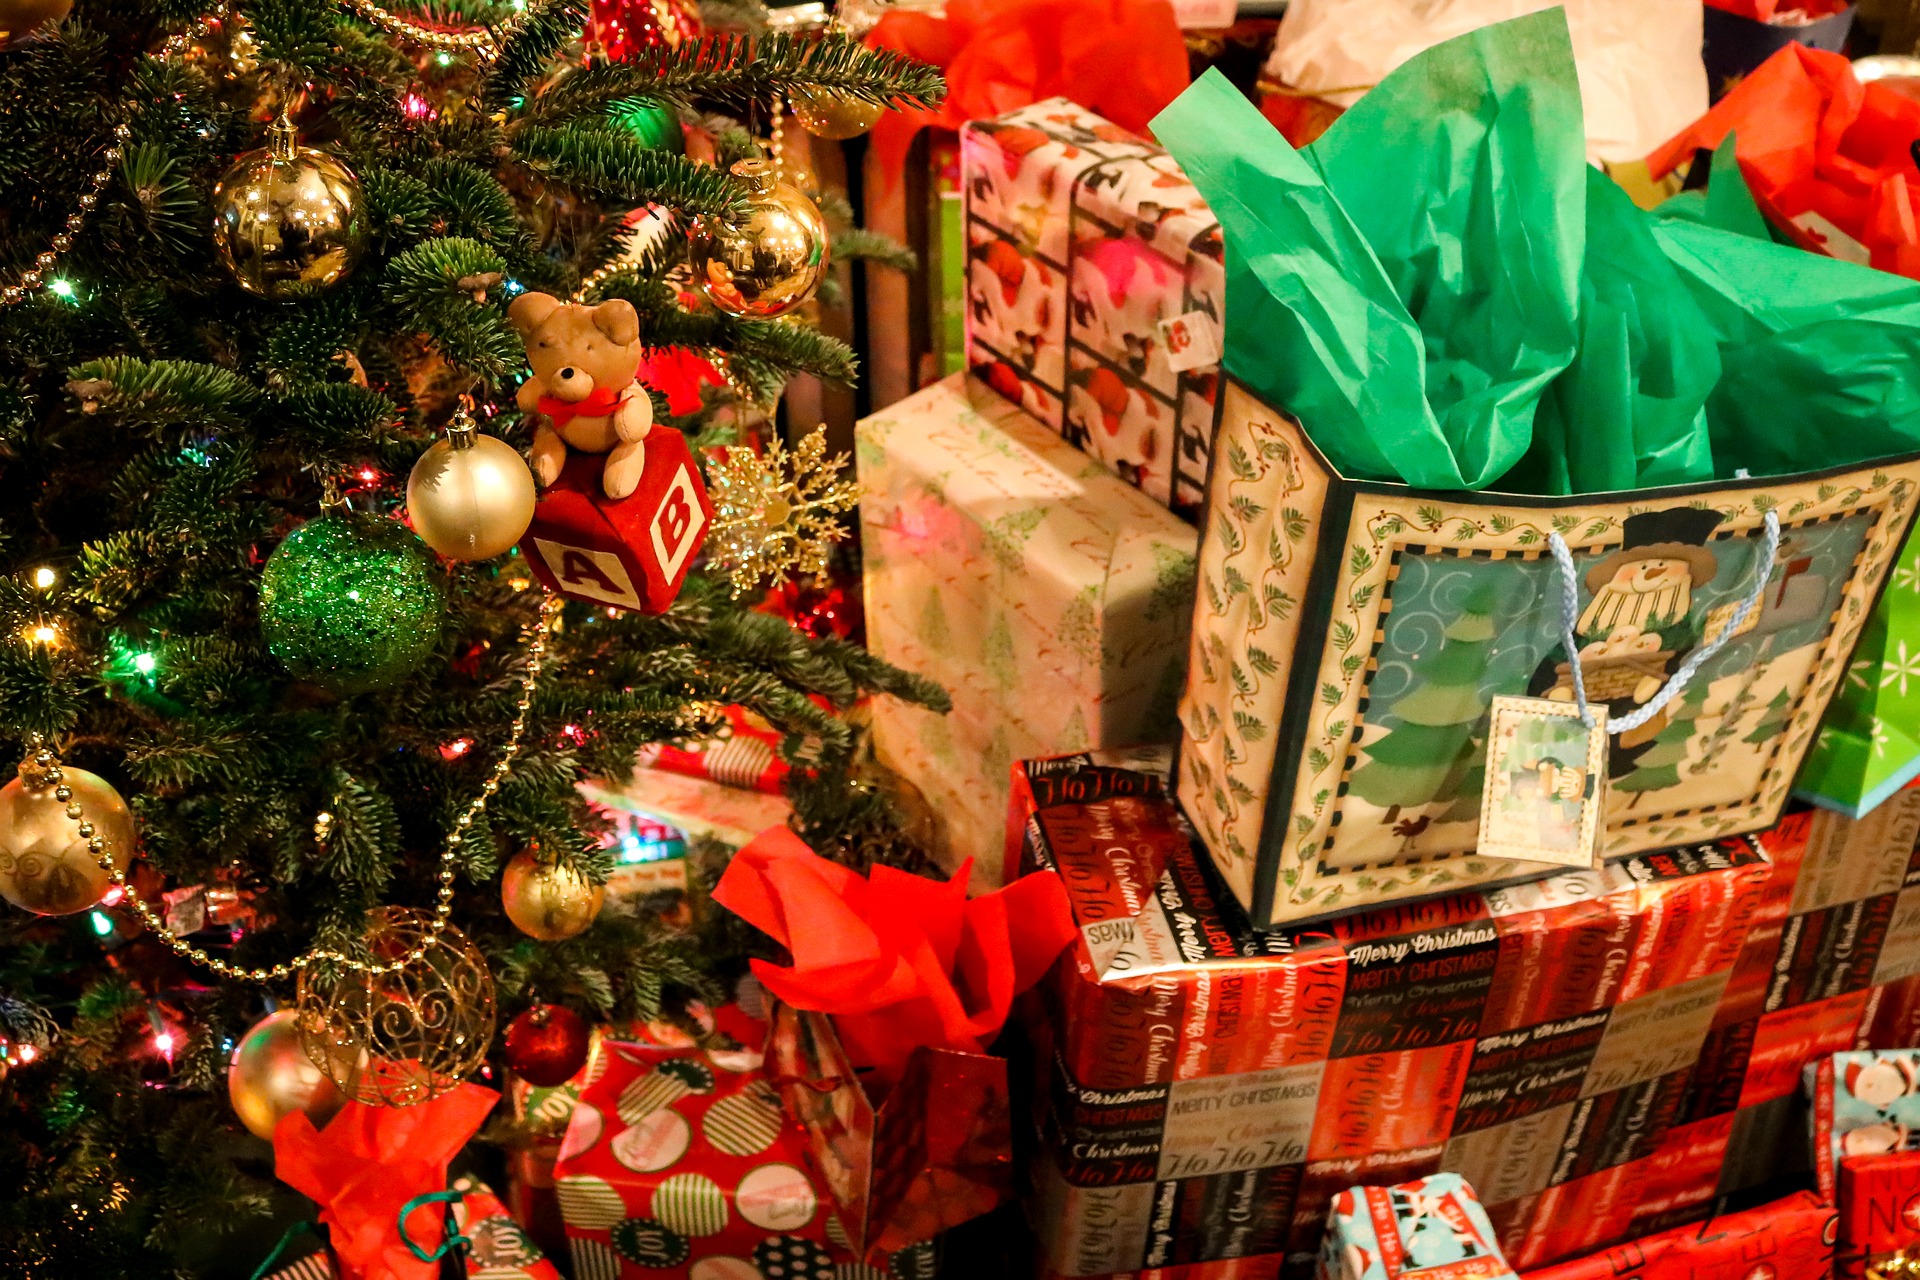 Hungarians planning to spend average HUF 59,000 on Christmas presents